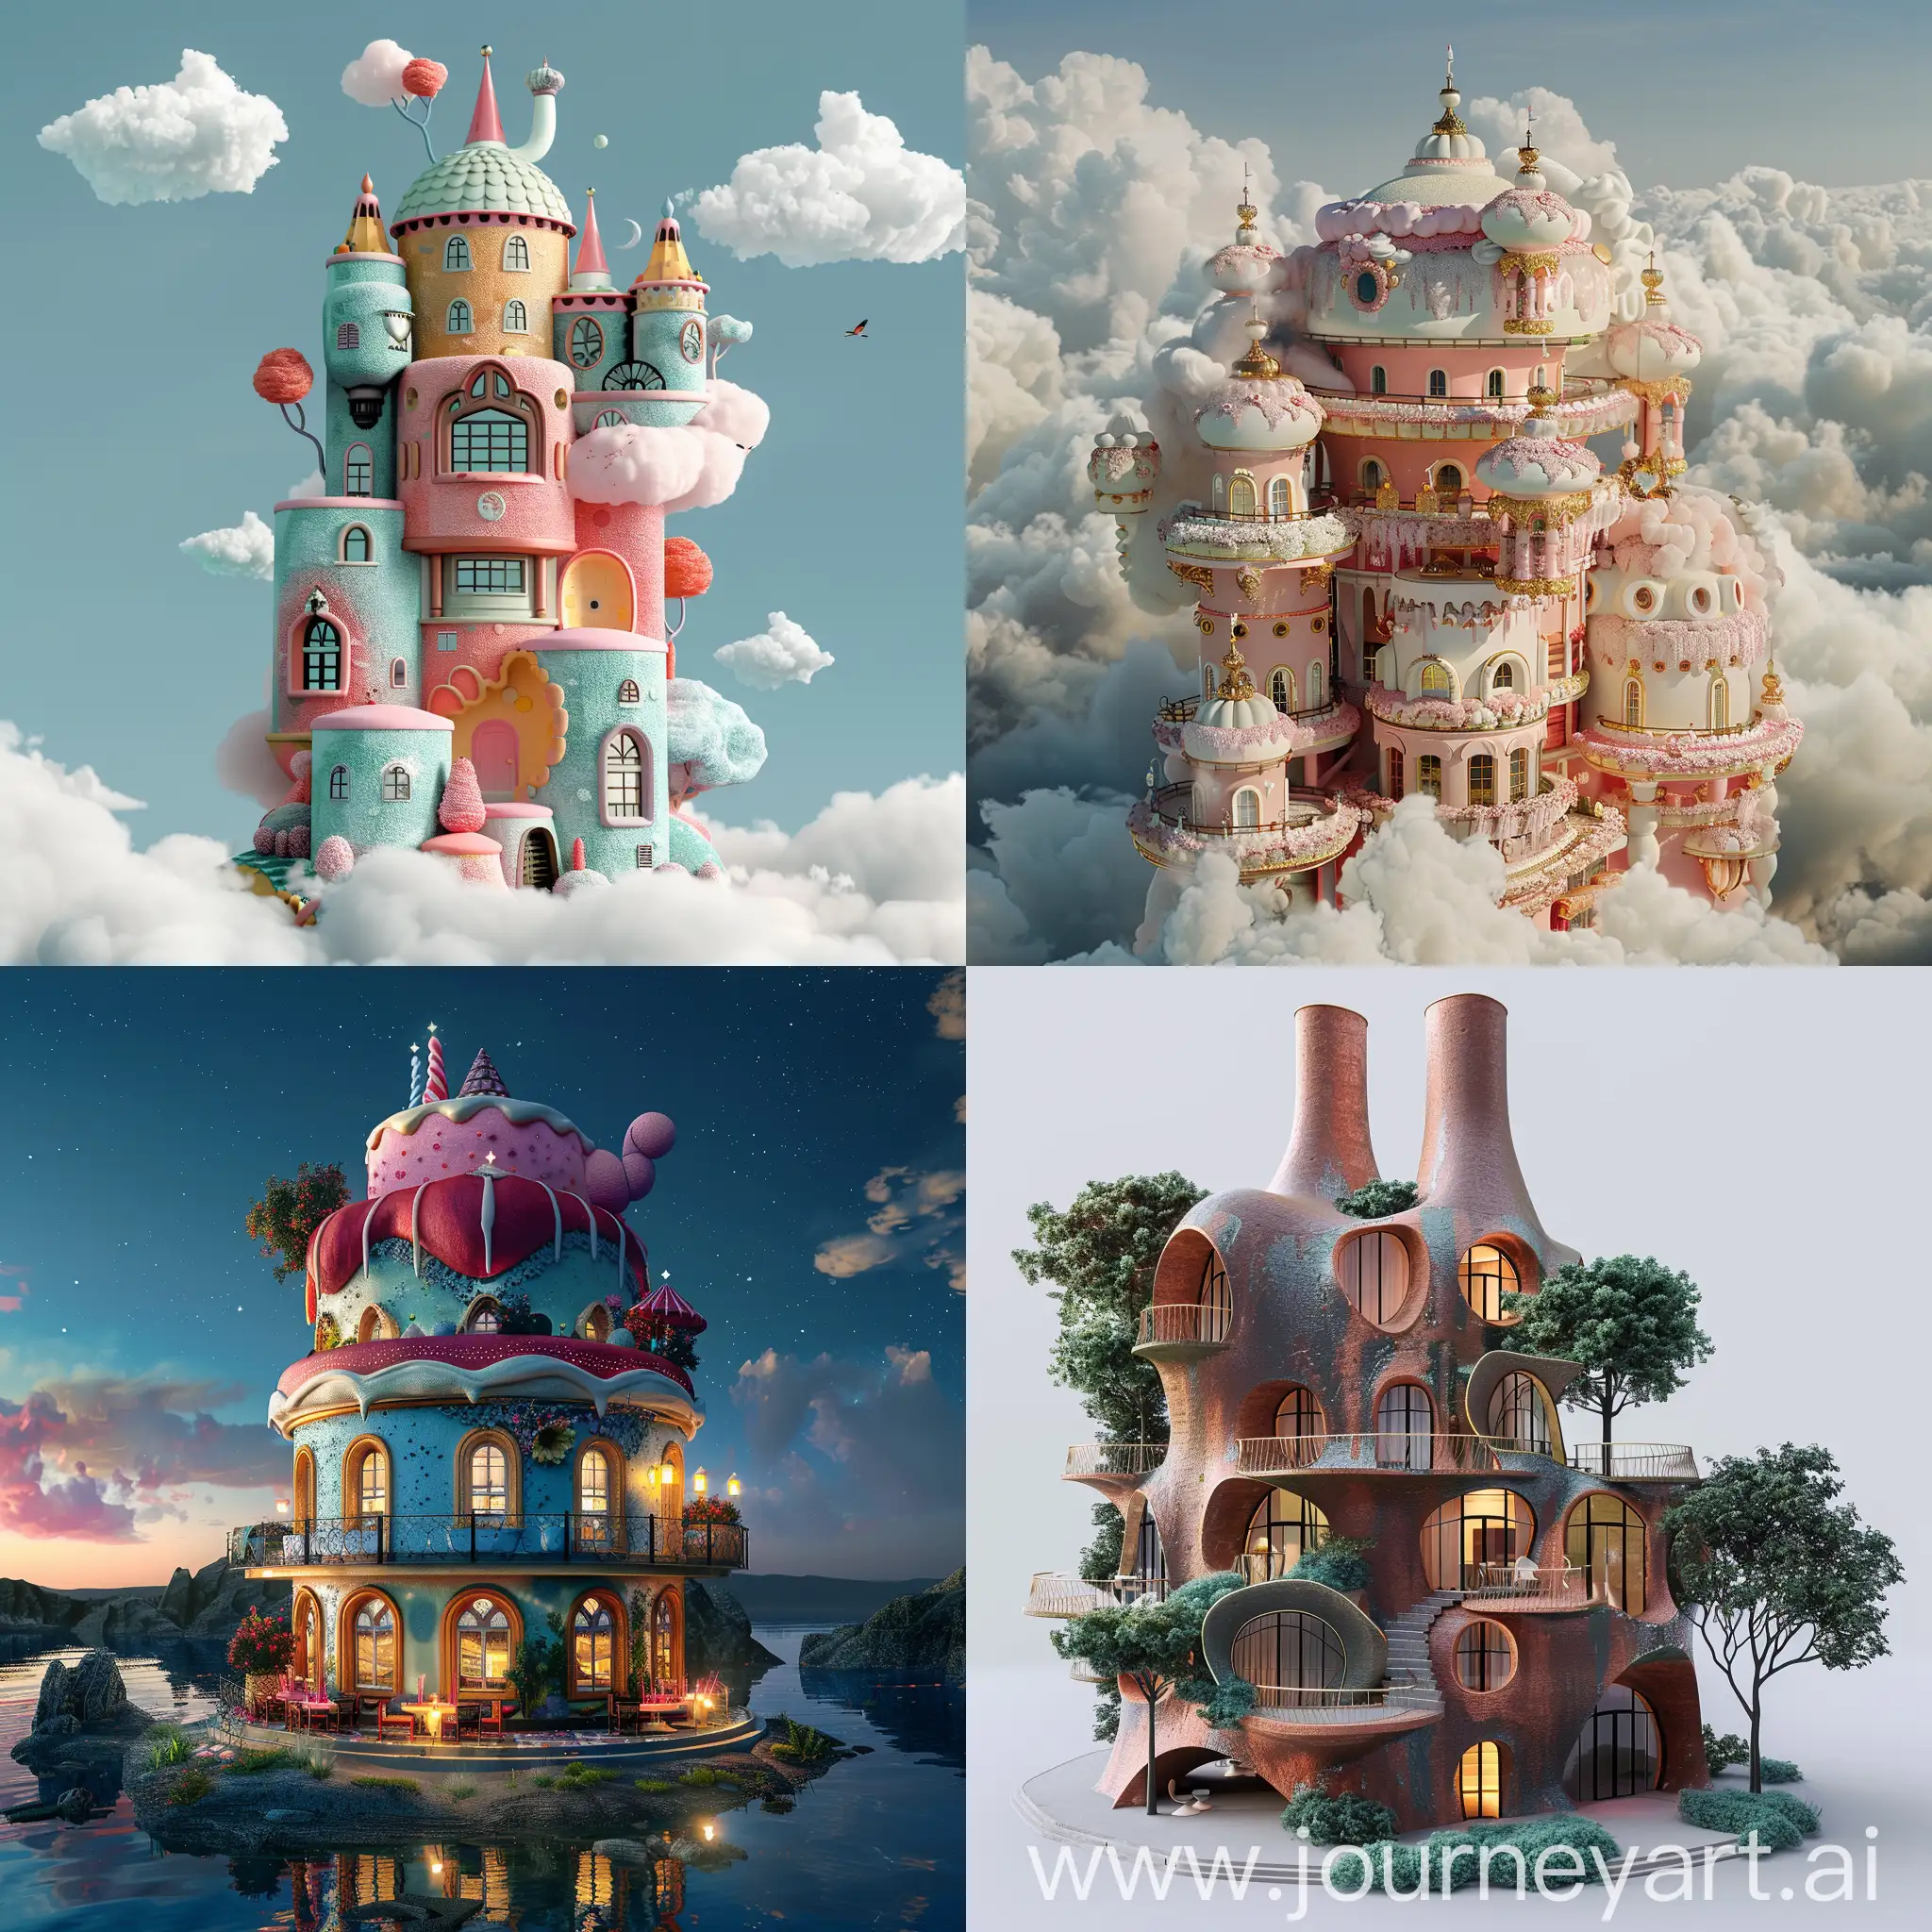 A building in the shape of a cake :: 3D animation